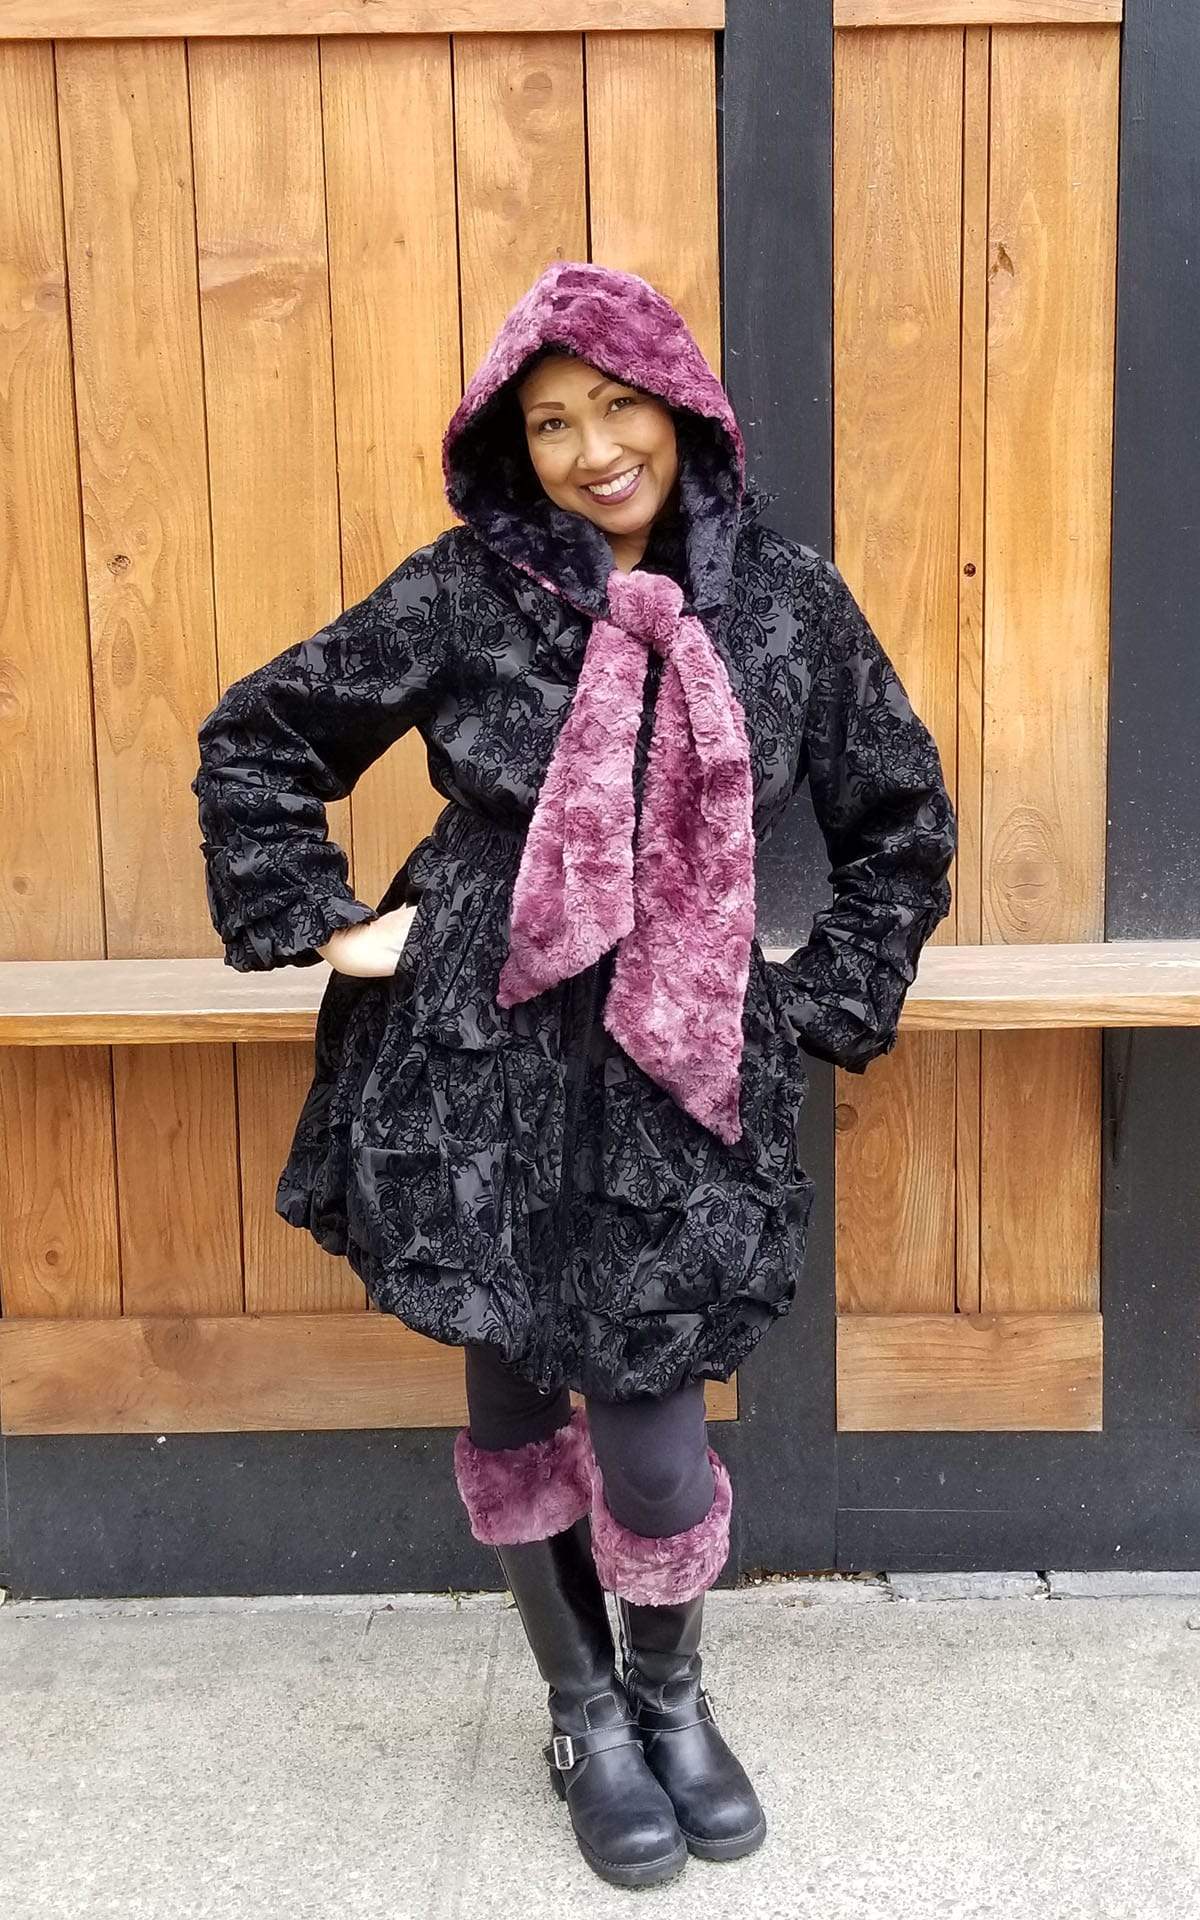 Unisex Two-Tone Hooded Scarf | Highland in  Thistle, Mauve reversing to Cuddly Fur in Black Faux Fur| Handmade in Seattle WA | Pandemonium Millinery